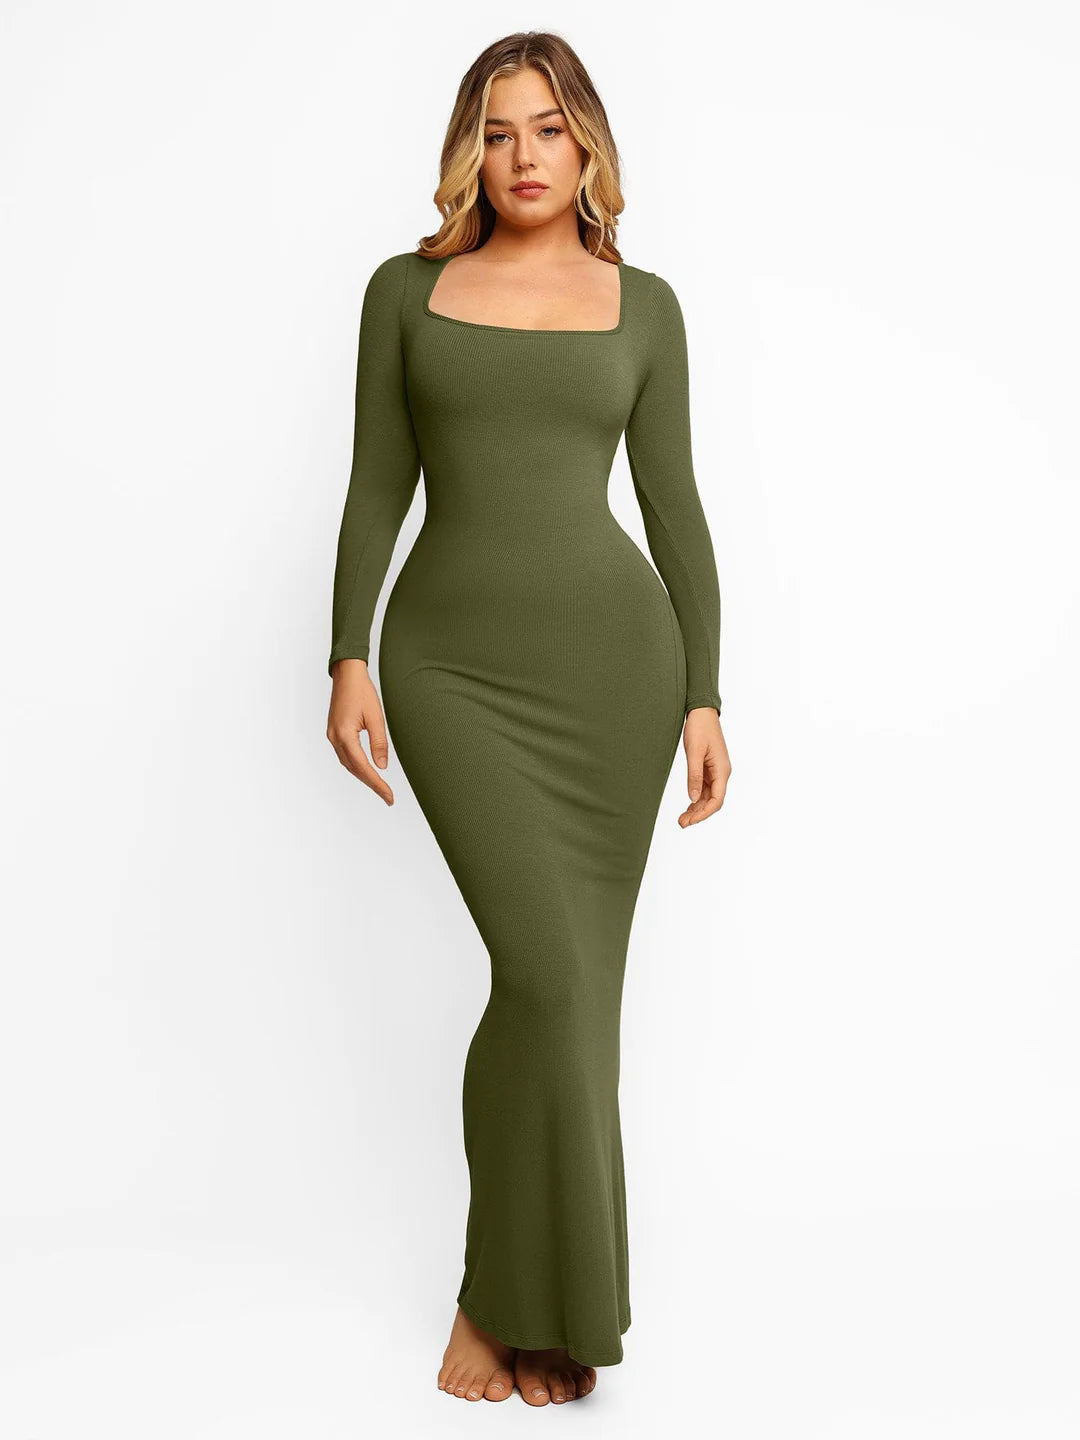 Dress with a built-in shaper - bar